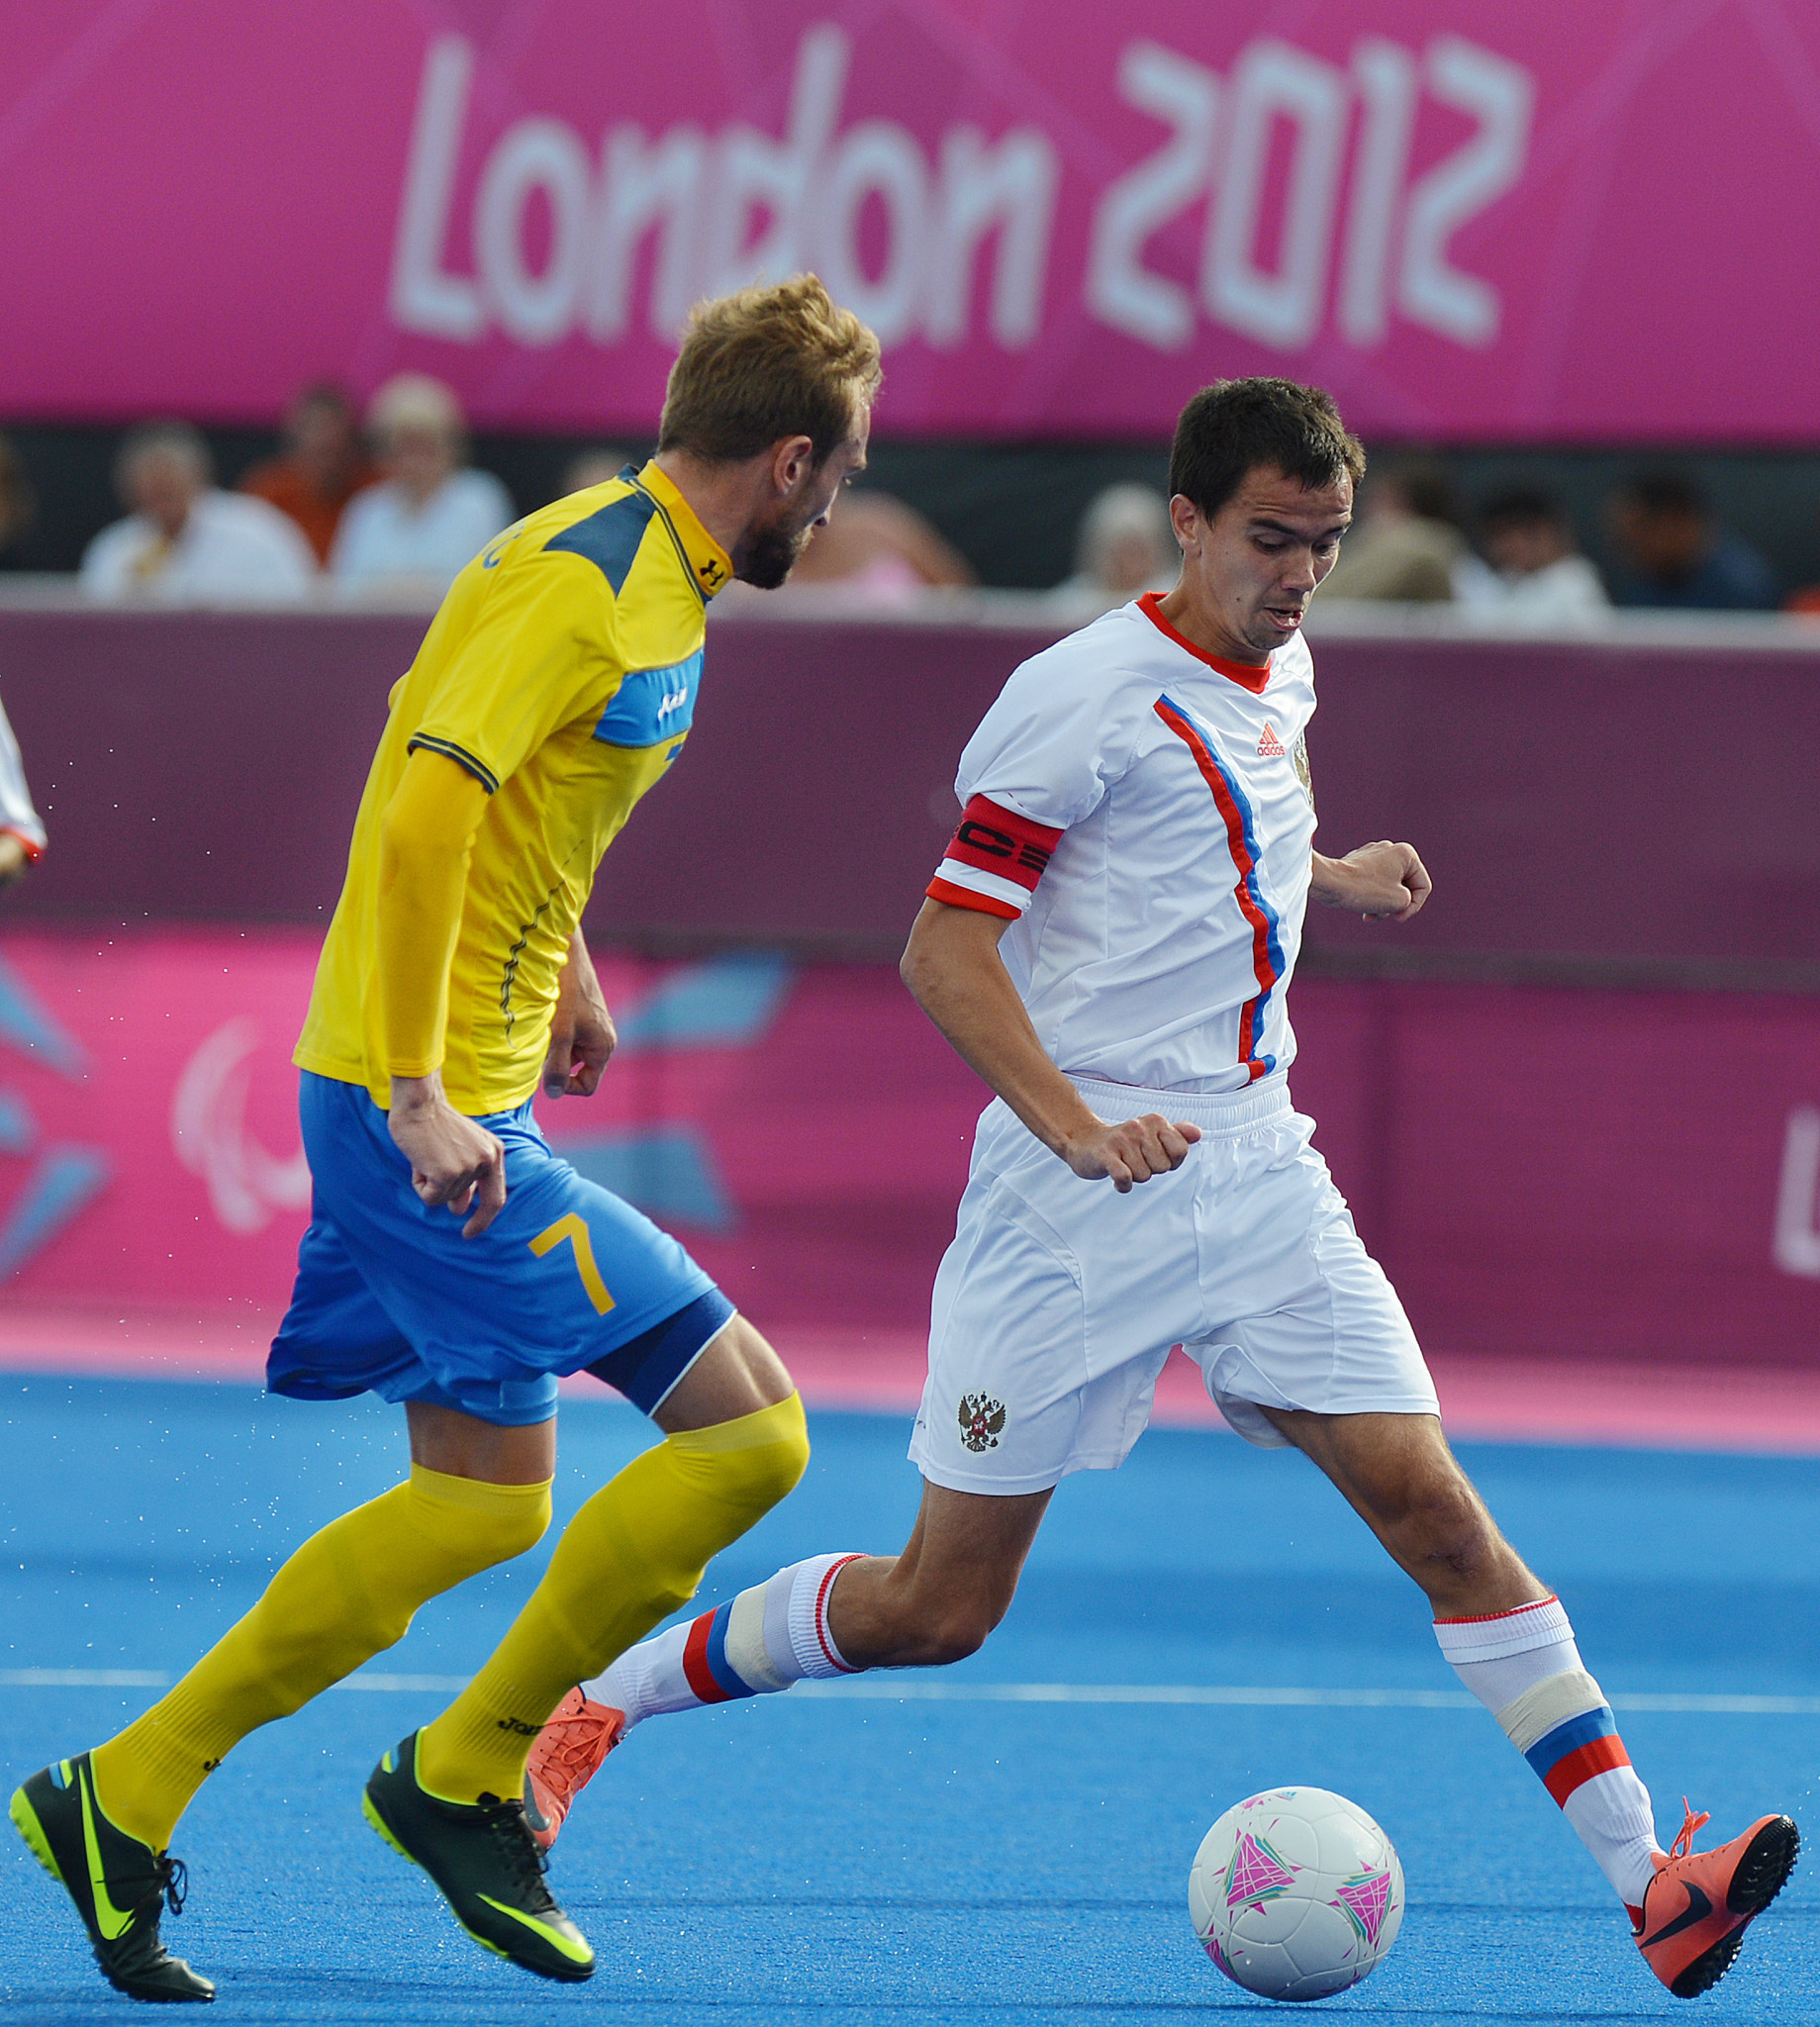 Ivan Potekhin, in white, was a member of Russia's seven-a-side cerebral palsy football team that won the Paralympic Games gold medal at London 2012 ©Getty Images